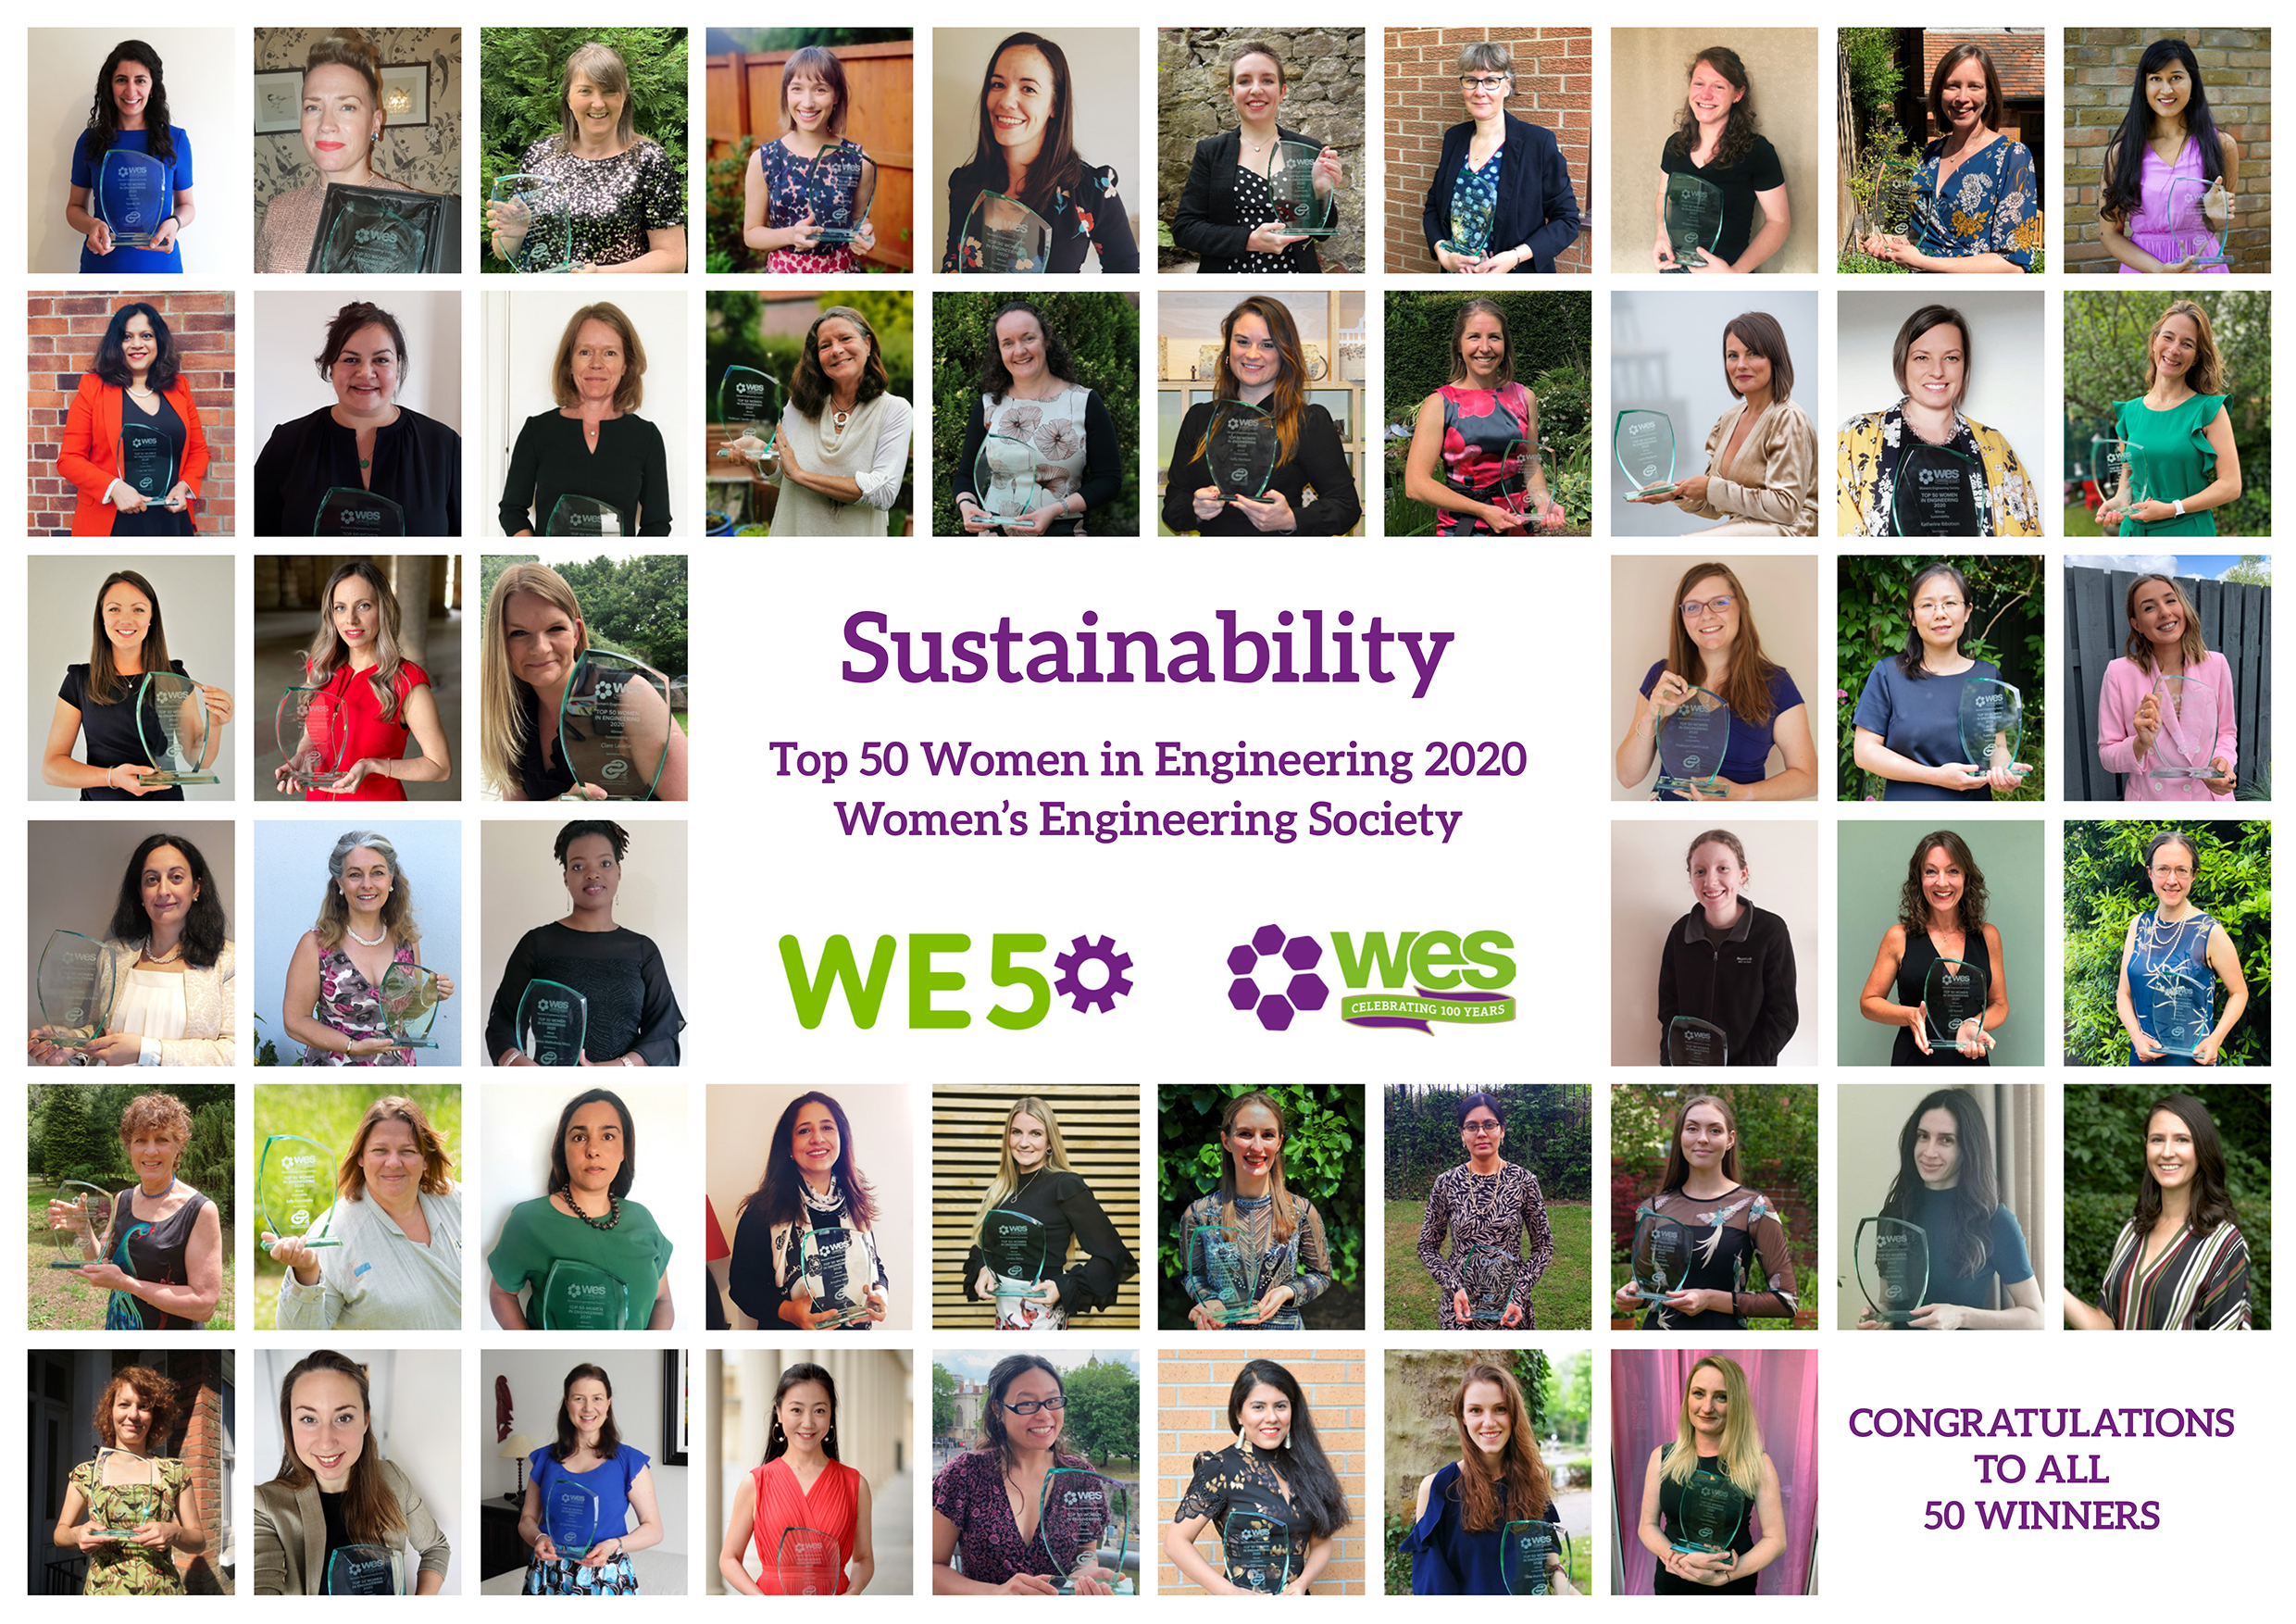 This year's WE50 awards celebrate female engineers who have made a significant contribution to sustainability within the industry.